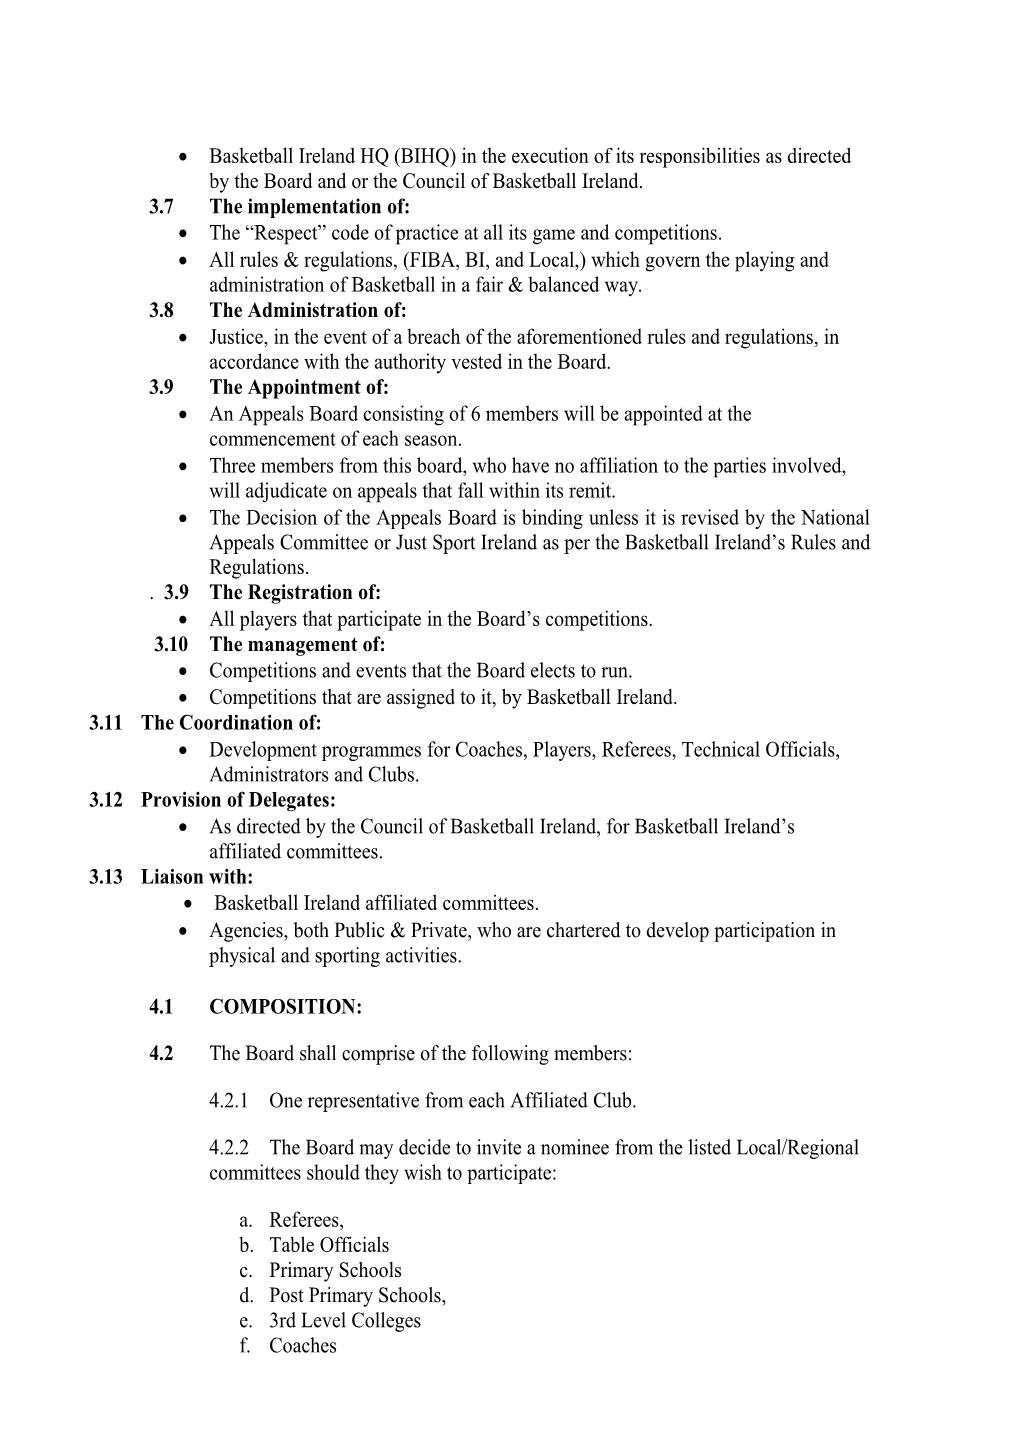 North East Basketball Board Constitution